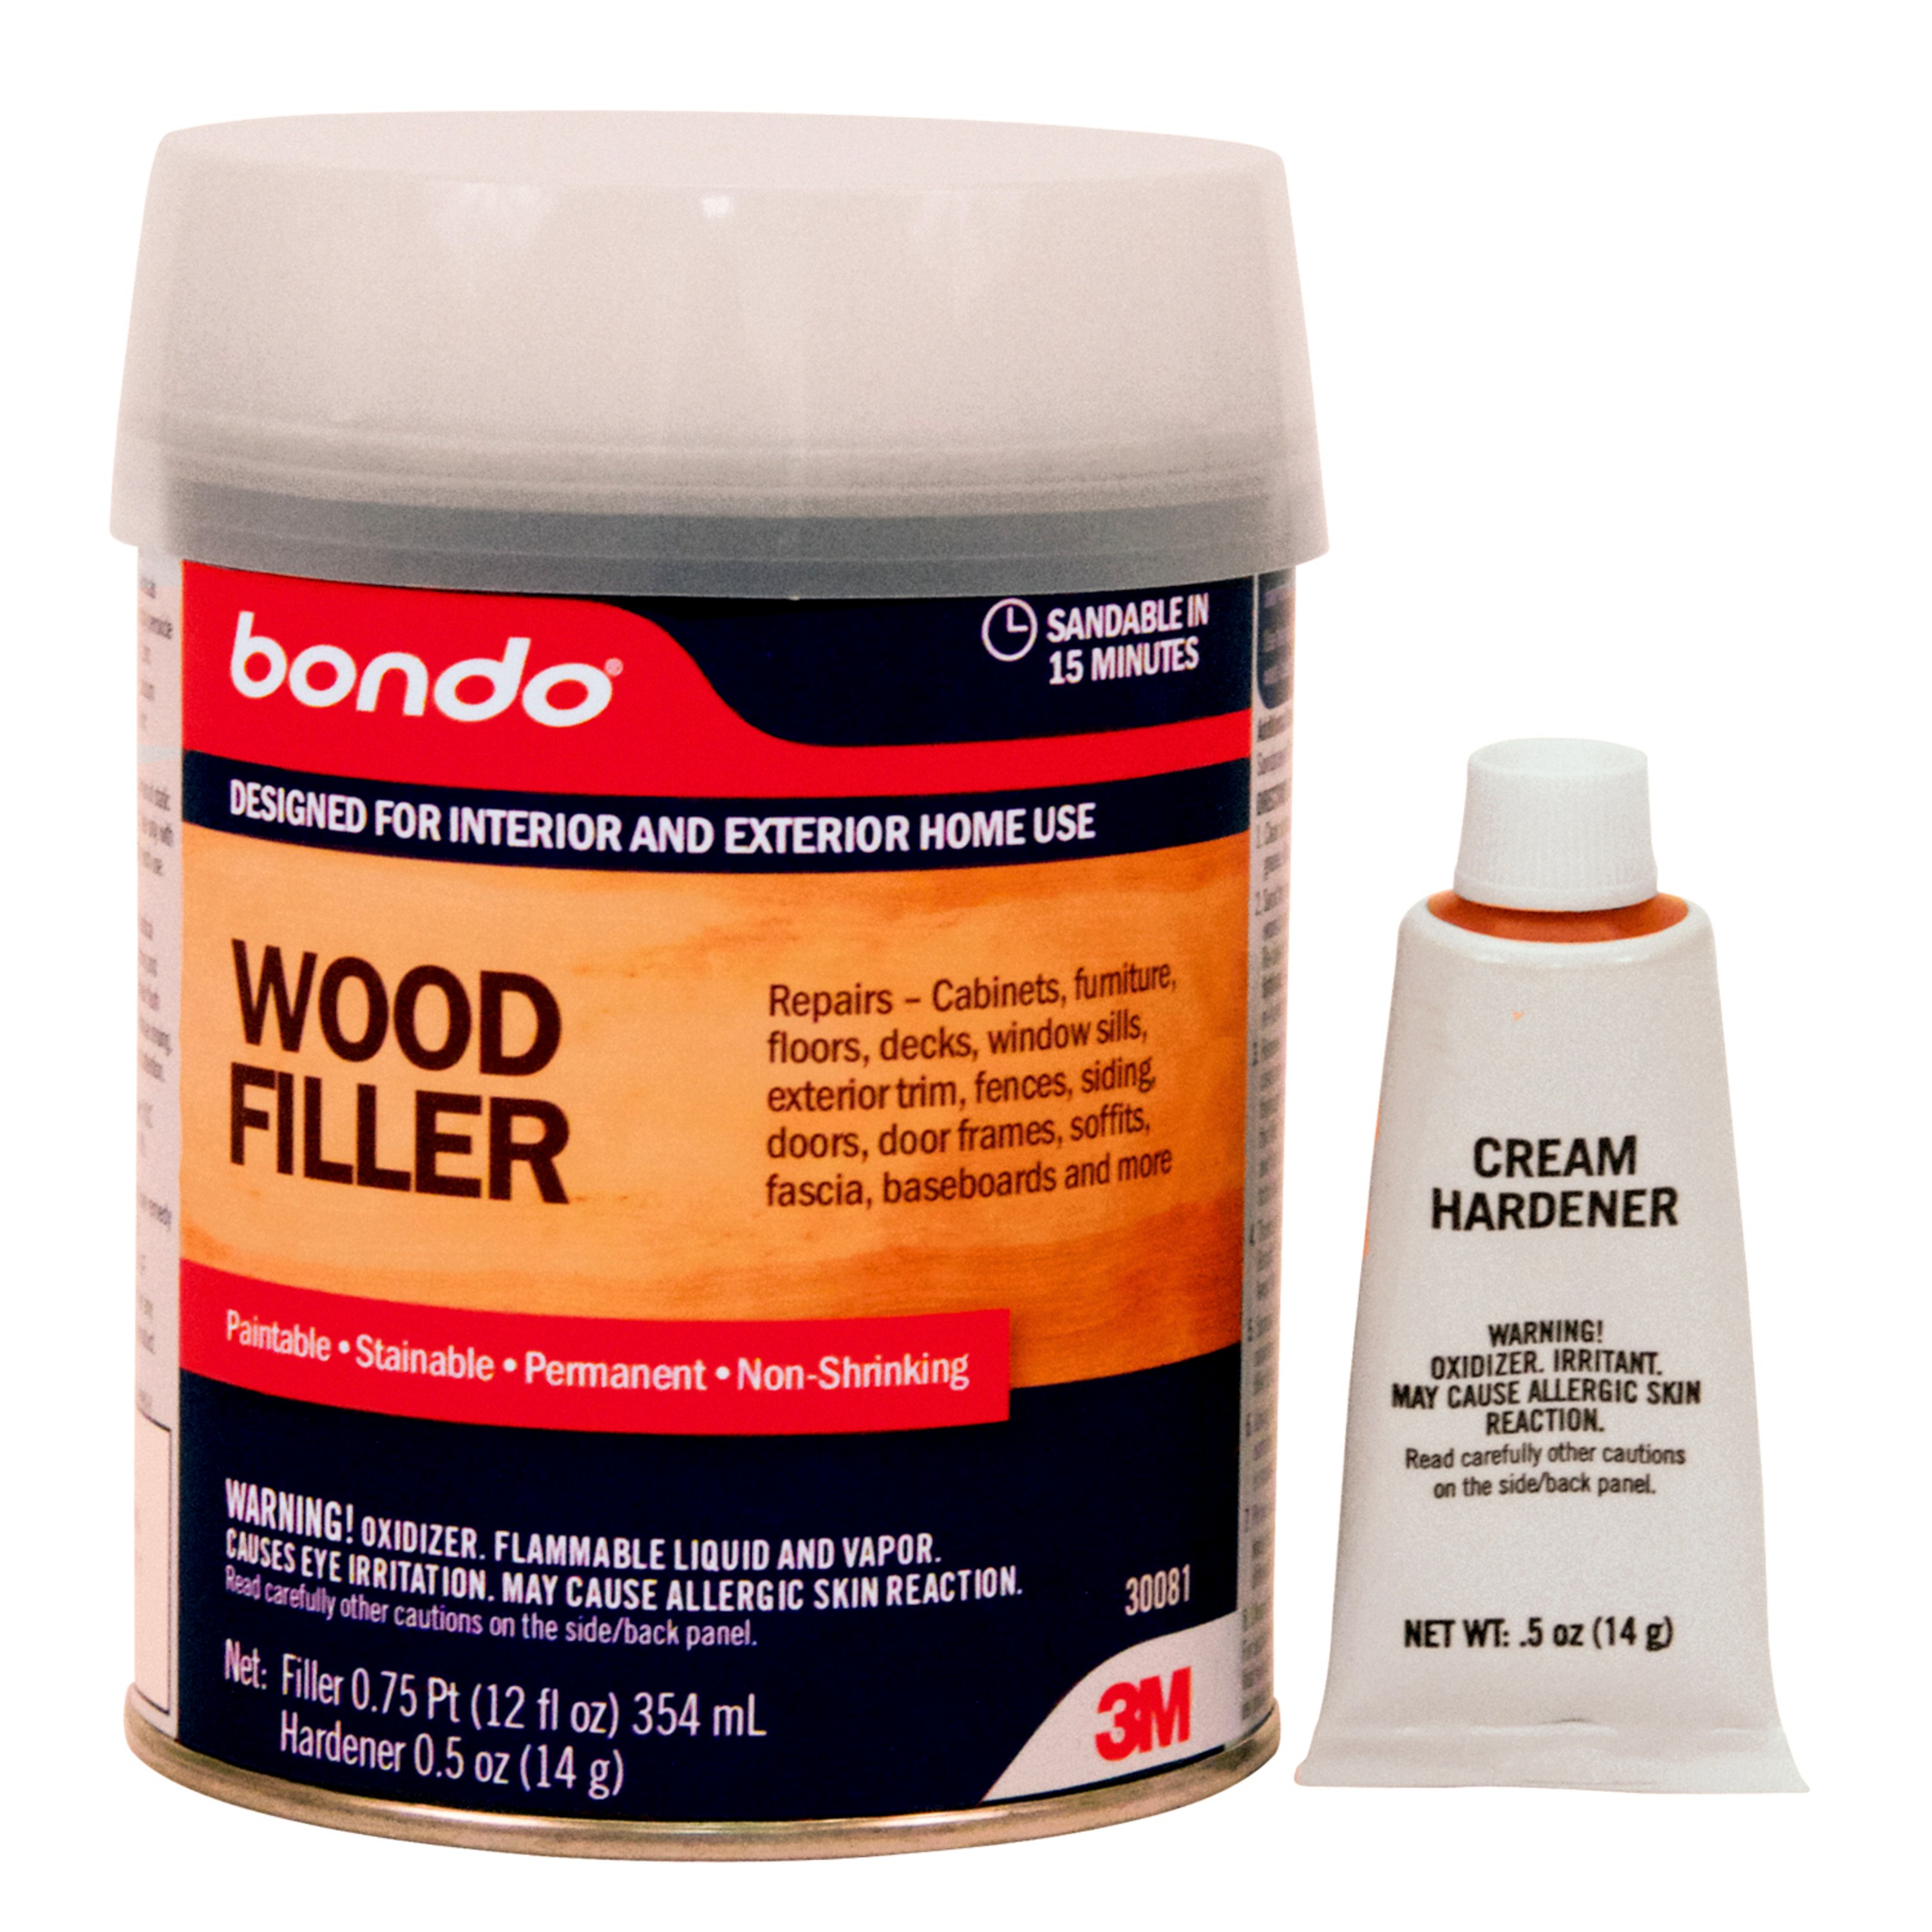 Bondo®  Wood Filler provides stable, durable repair for wood surfaces on a broad range of projects inside and outside the home.